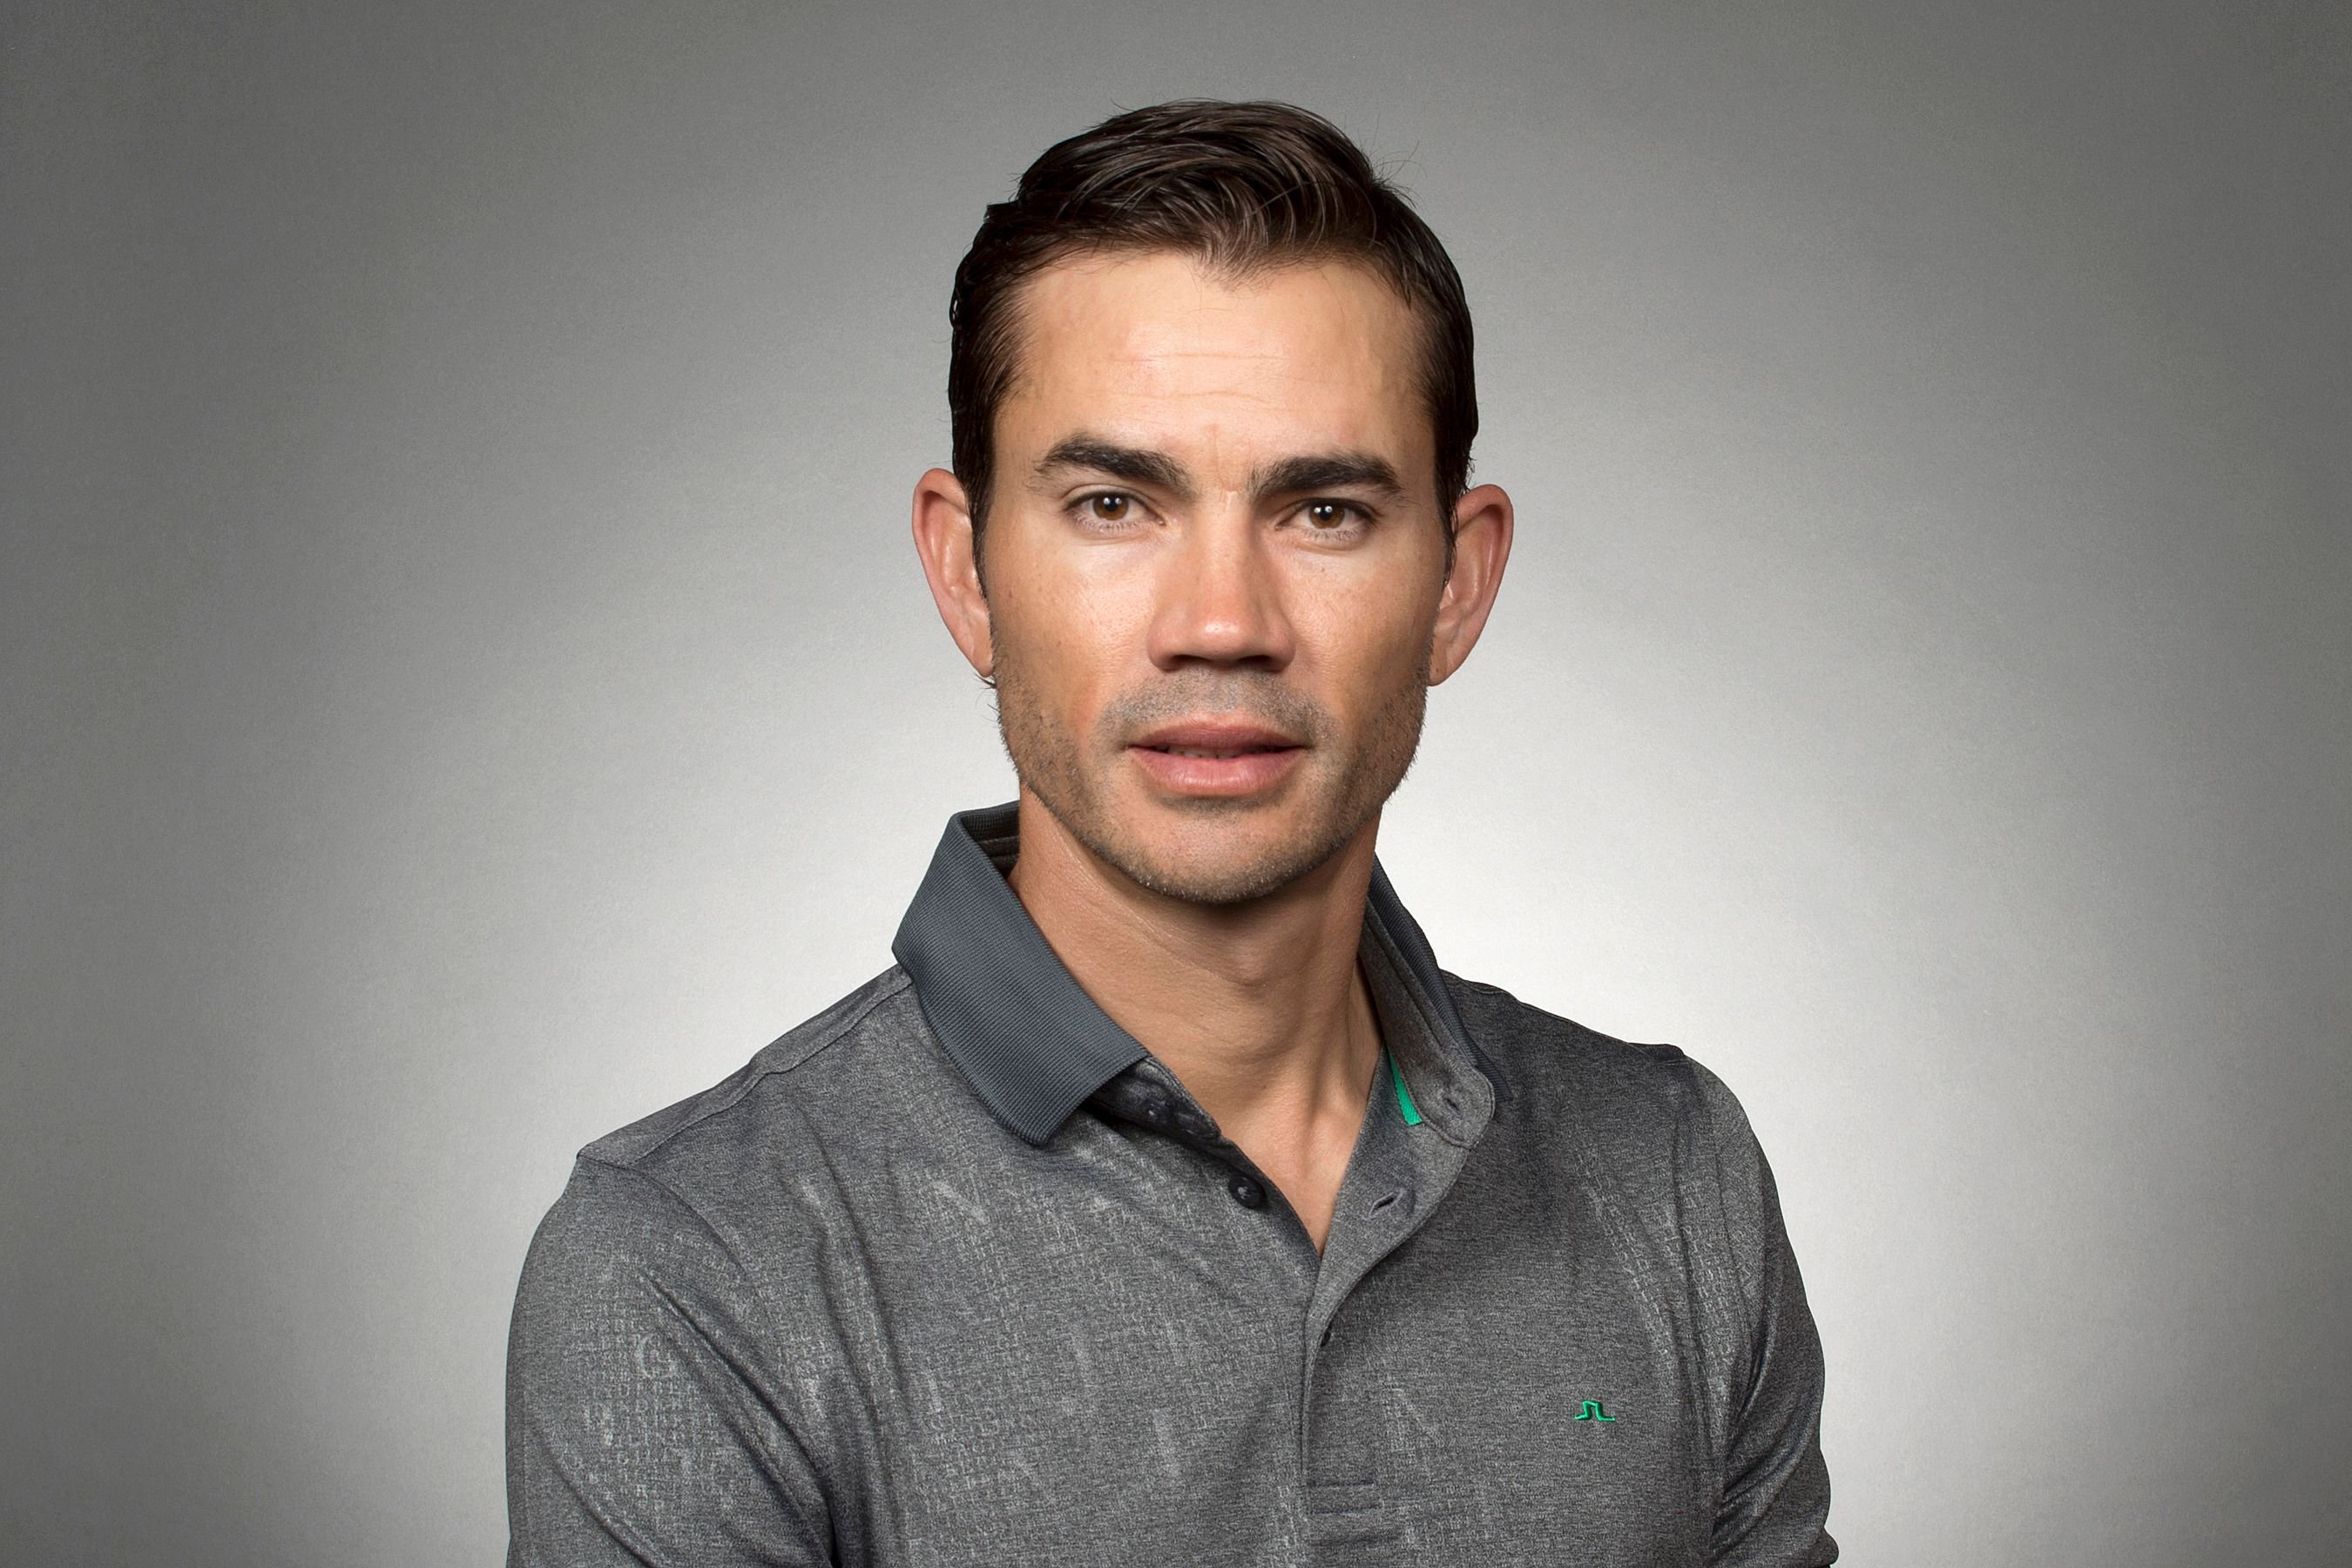 Camilo Villegas's current official PGA TOUR headshot. Image created on February 13, 2017. | Photo: Getty Images